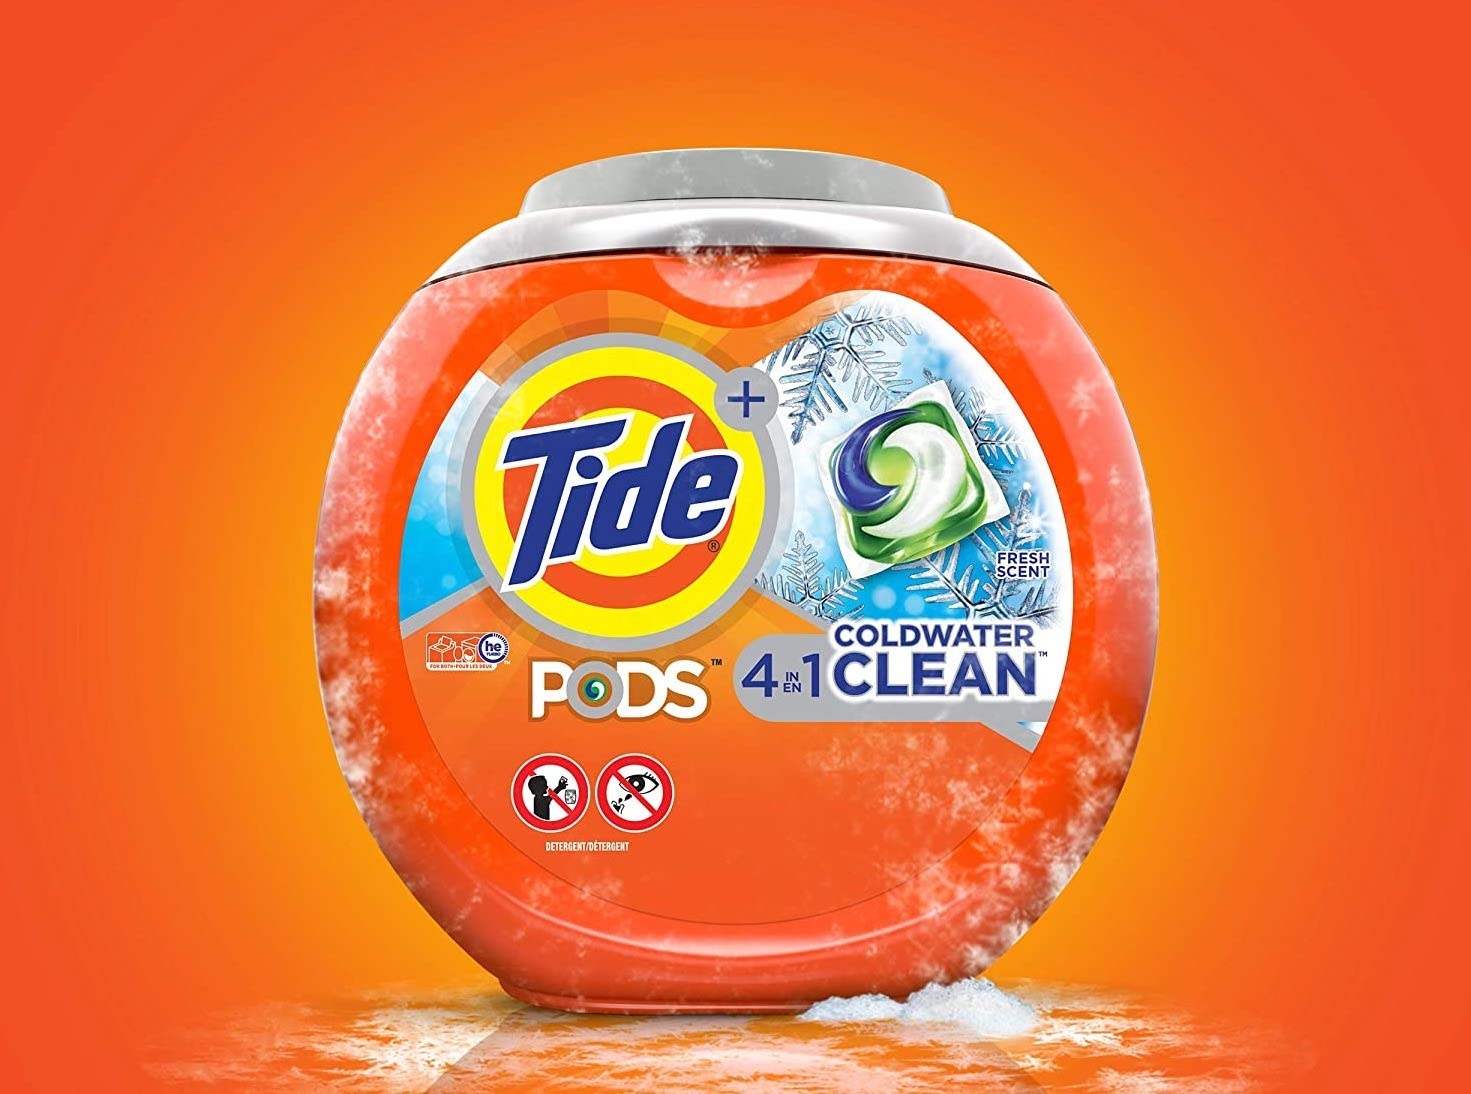 Tub of Tide Coldwater Clean Pods